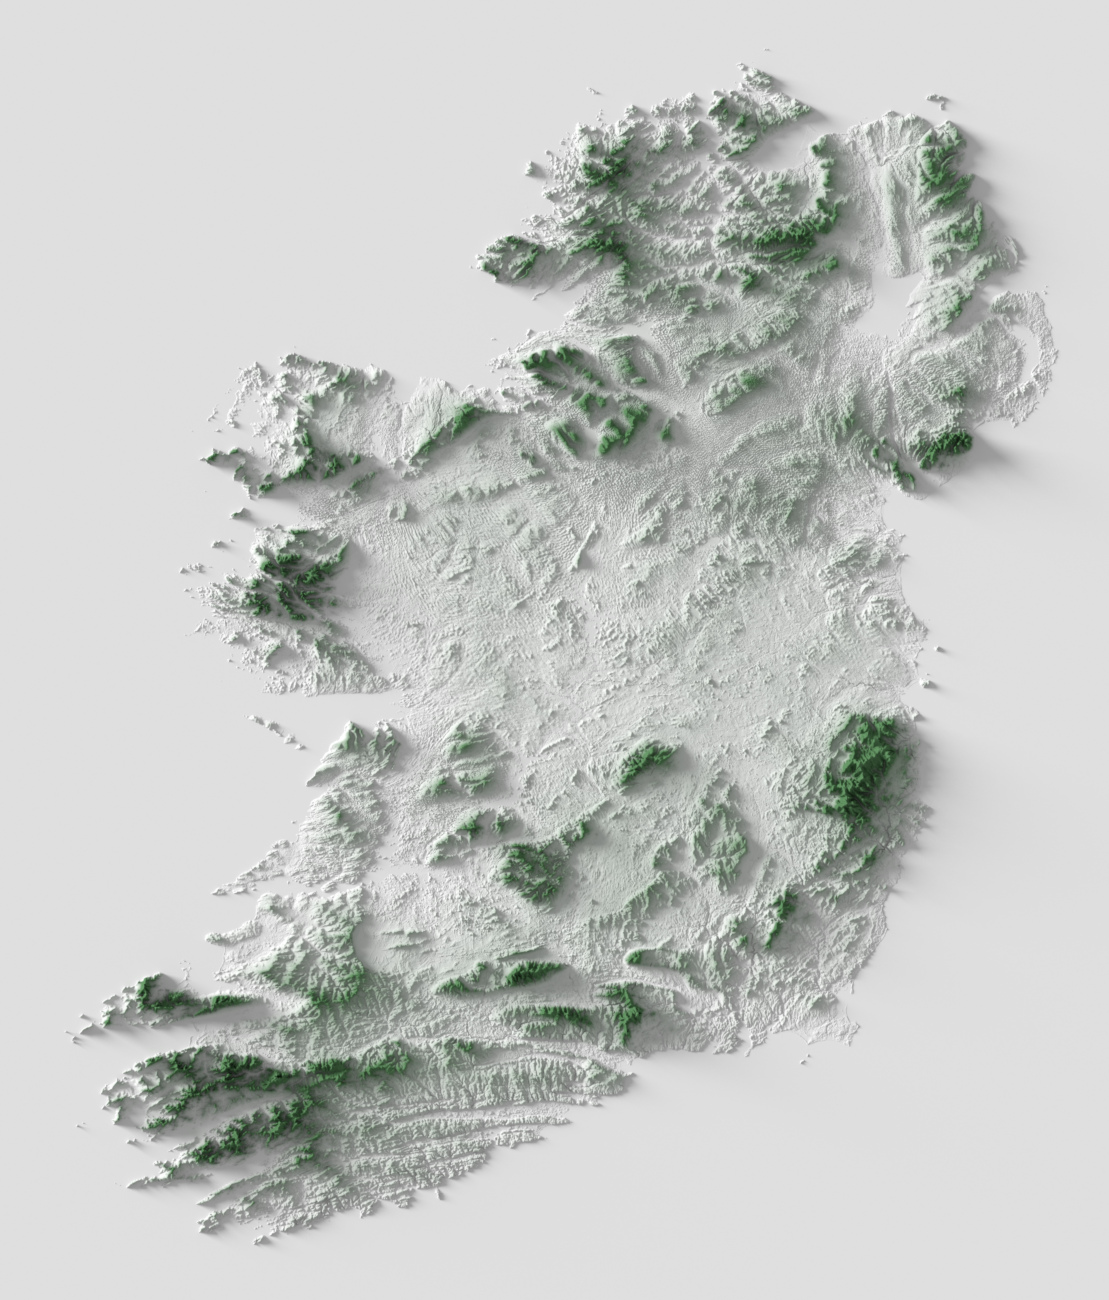 Preview of terrain heightmap render of the island of Ireland using heightfield shading mapping